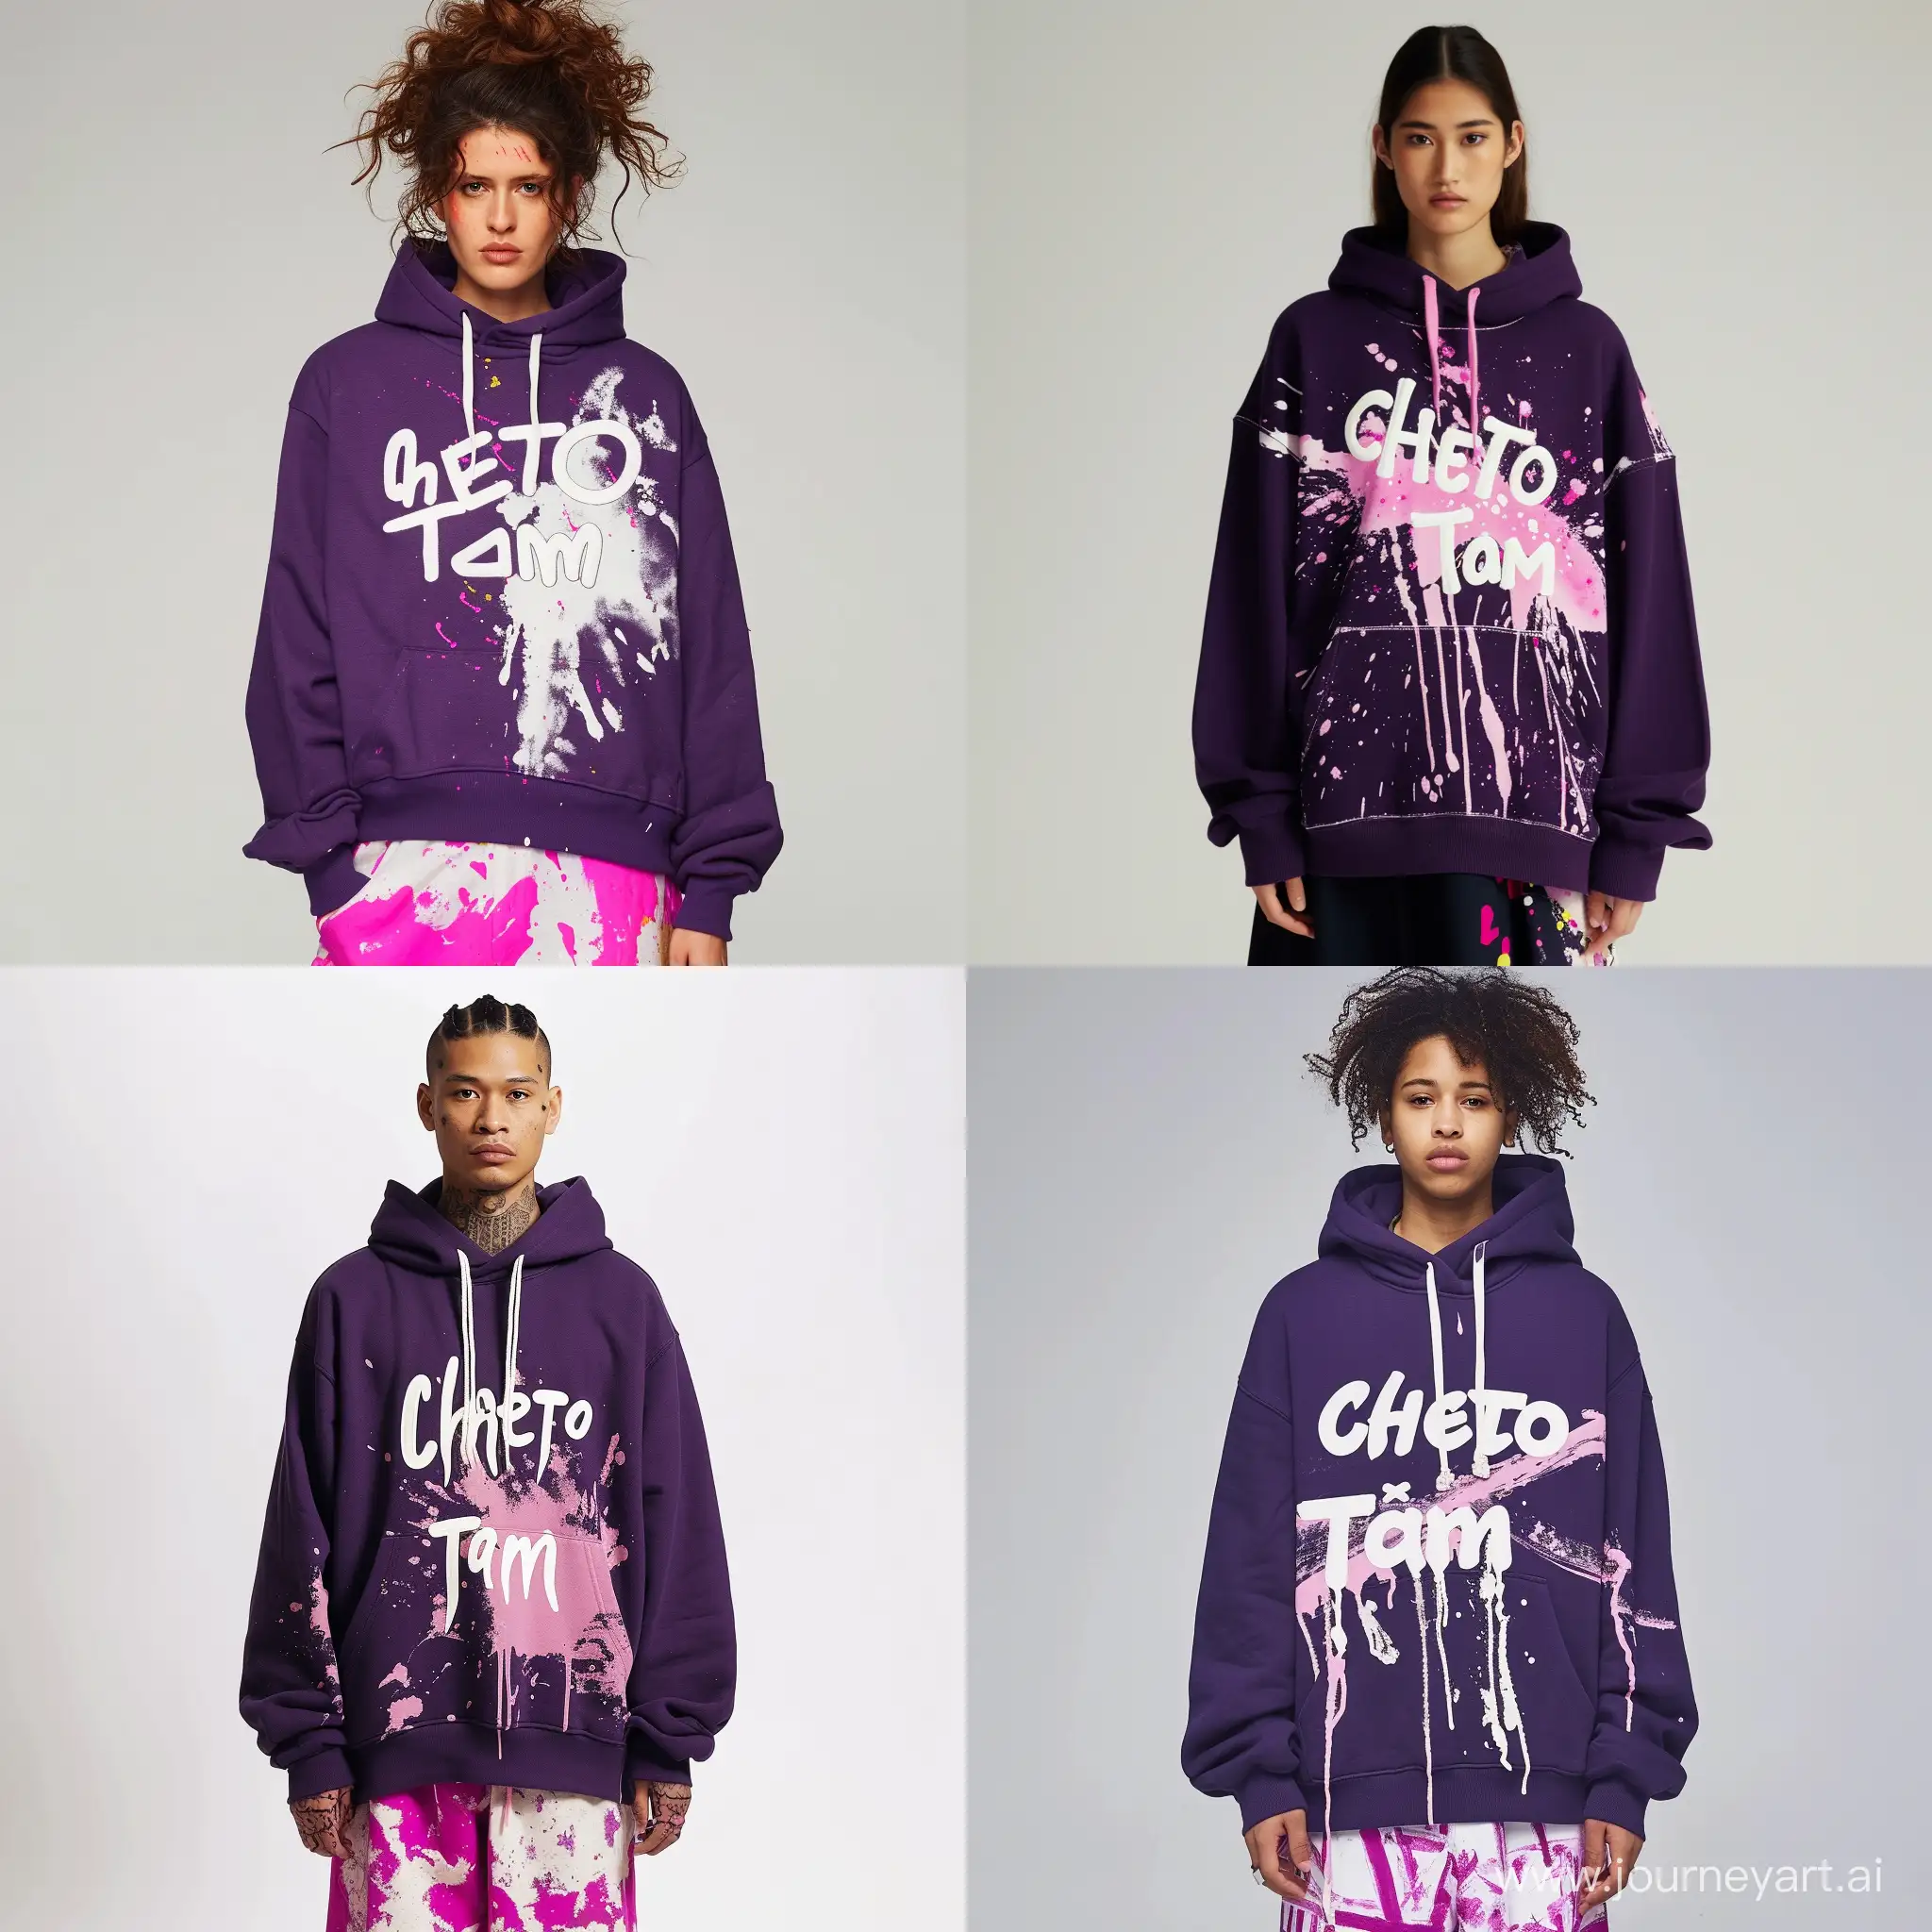 Purple hoodie with white and pink paint and white embroidered lettering "cheto tam", on the model's person, in white background